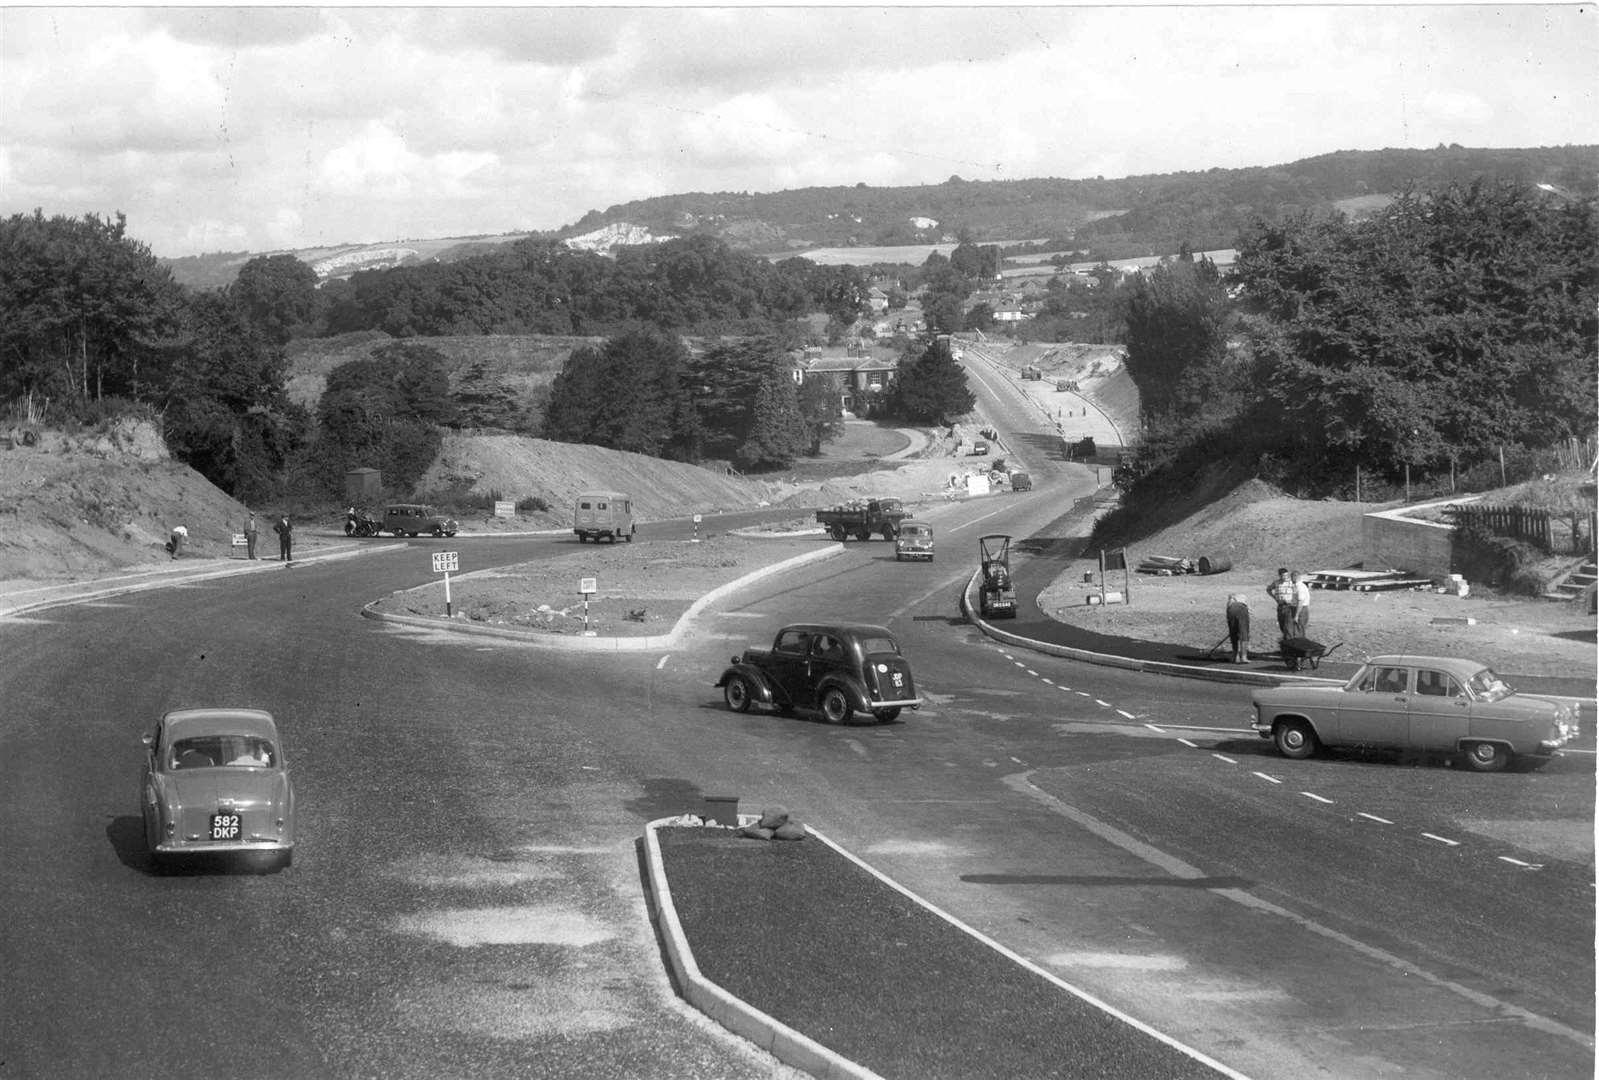 In 1960 the opening of Maidstone by-pass, now the M20, was to have significant effects on the area. This was these scene at the Maidstone-Chatham Road, near the Running Horse, as road improvements were carried out in readiness for the motorway